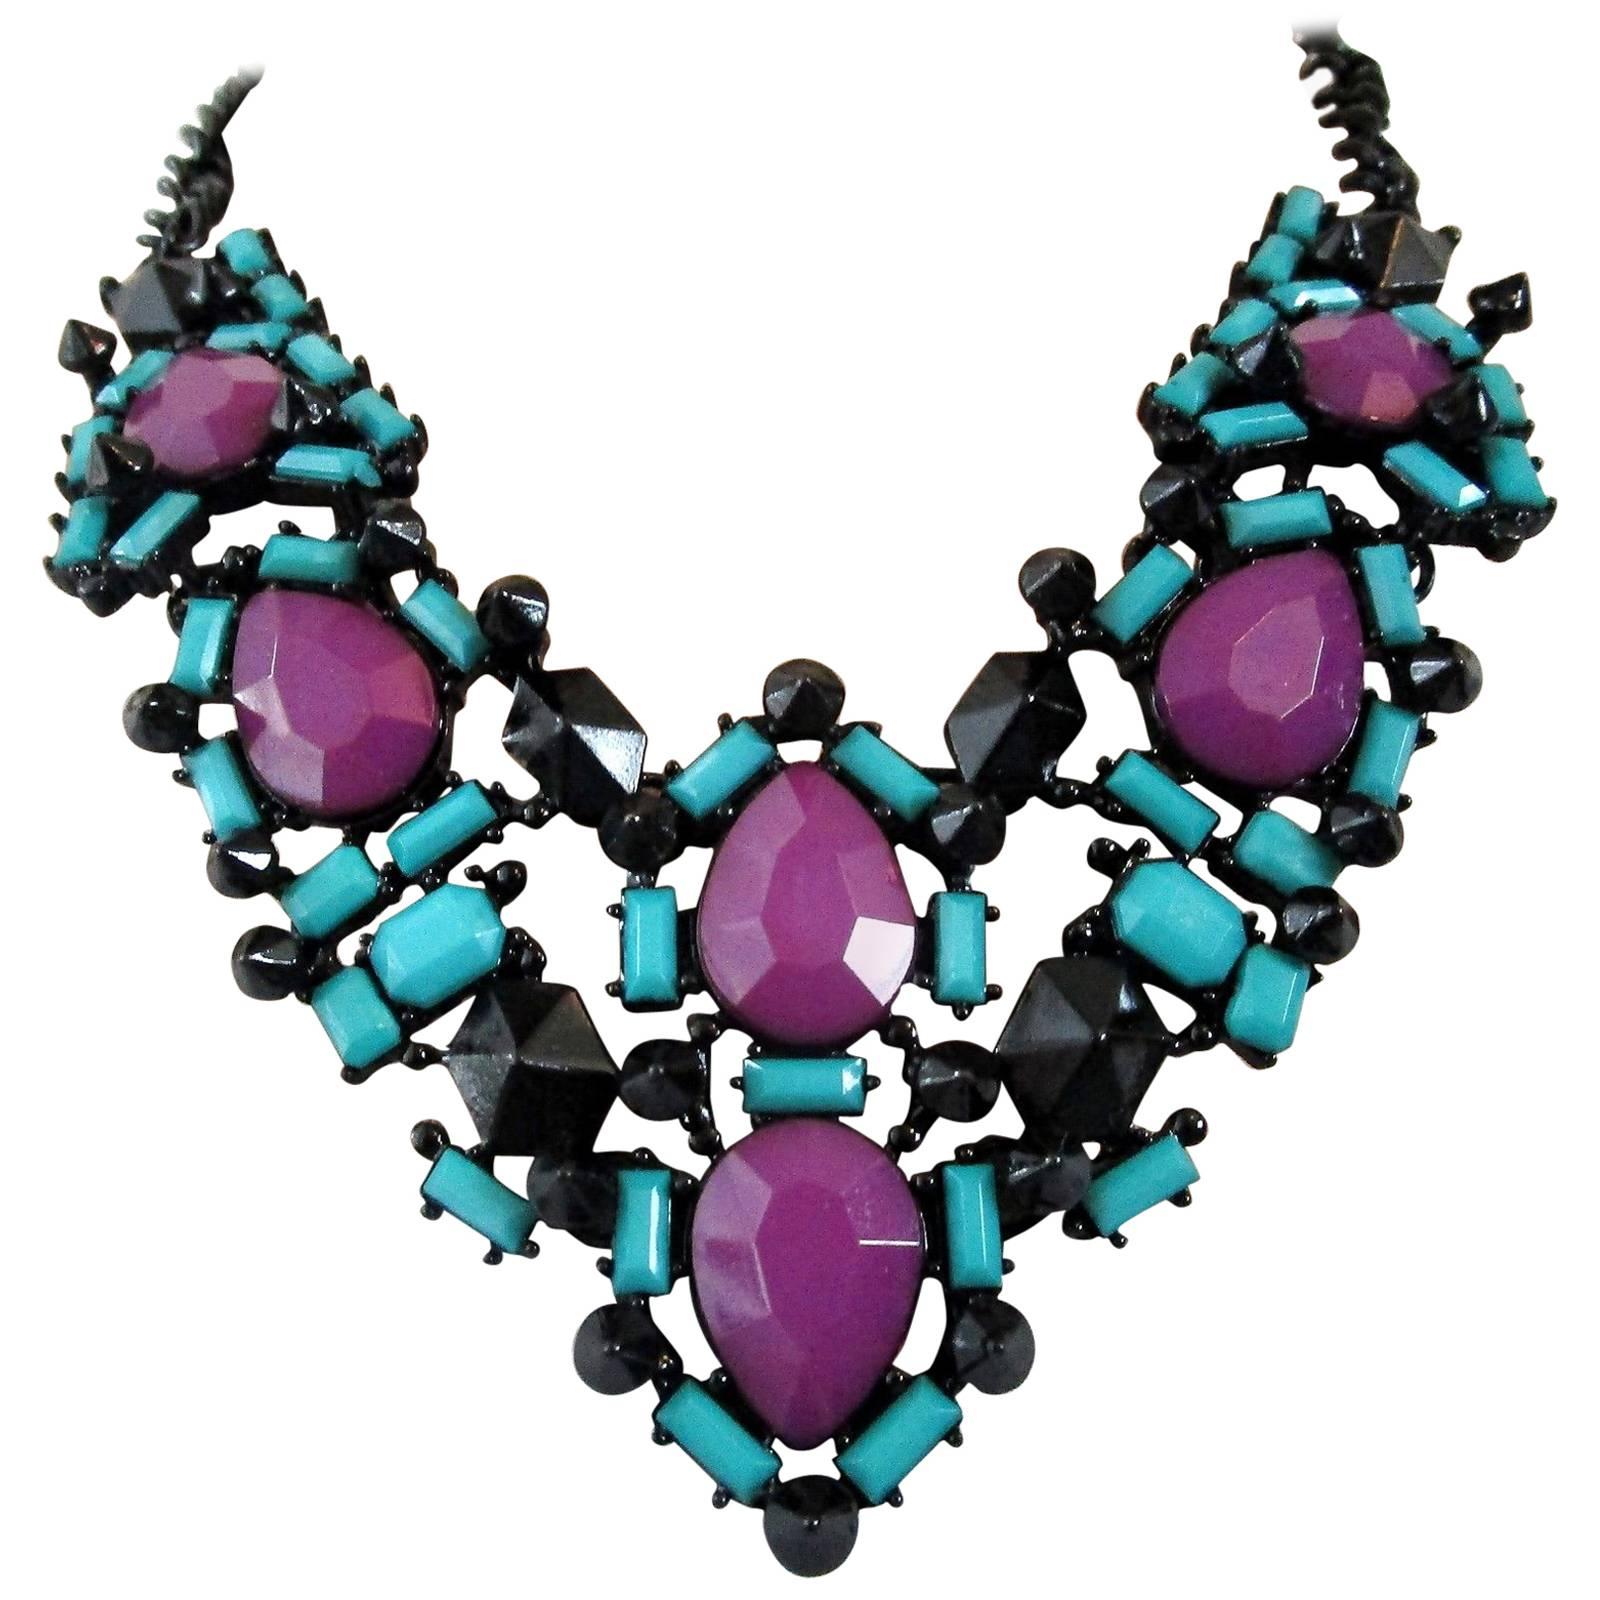 Outstanding Blue Teal Purple and Black Faux Gem Necklace For Sale